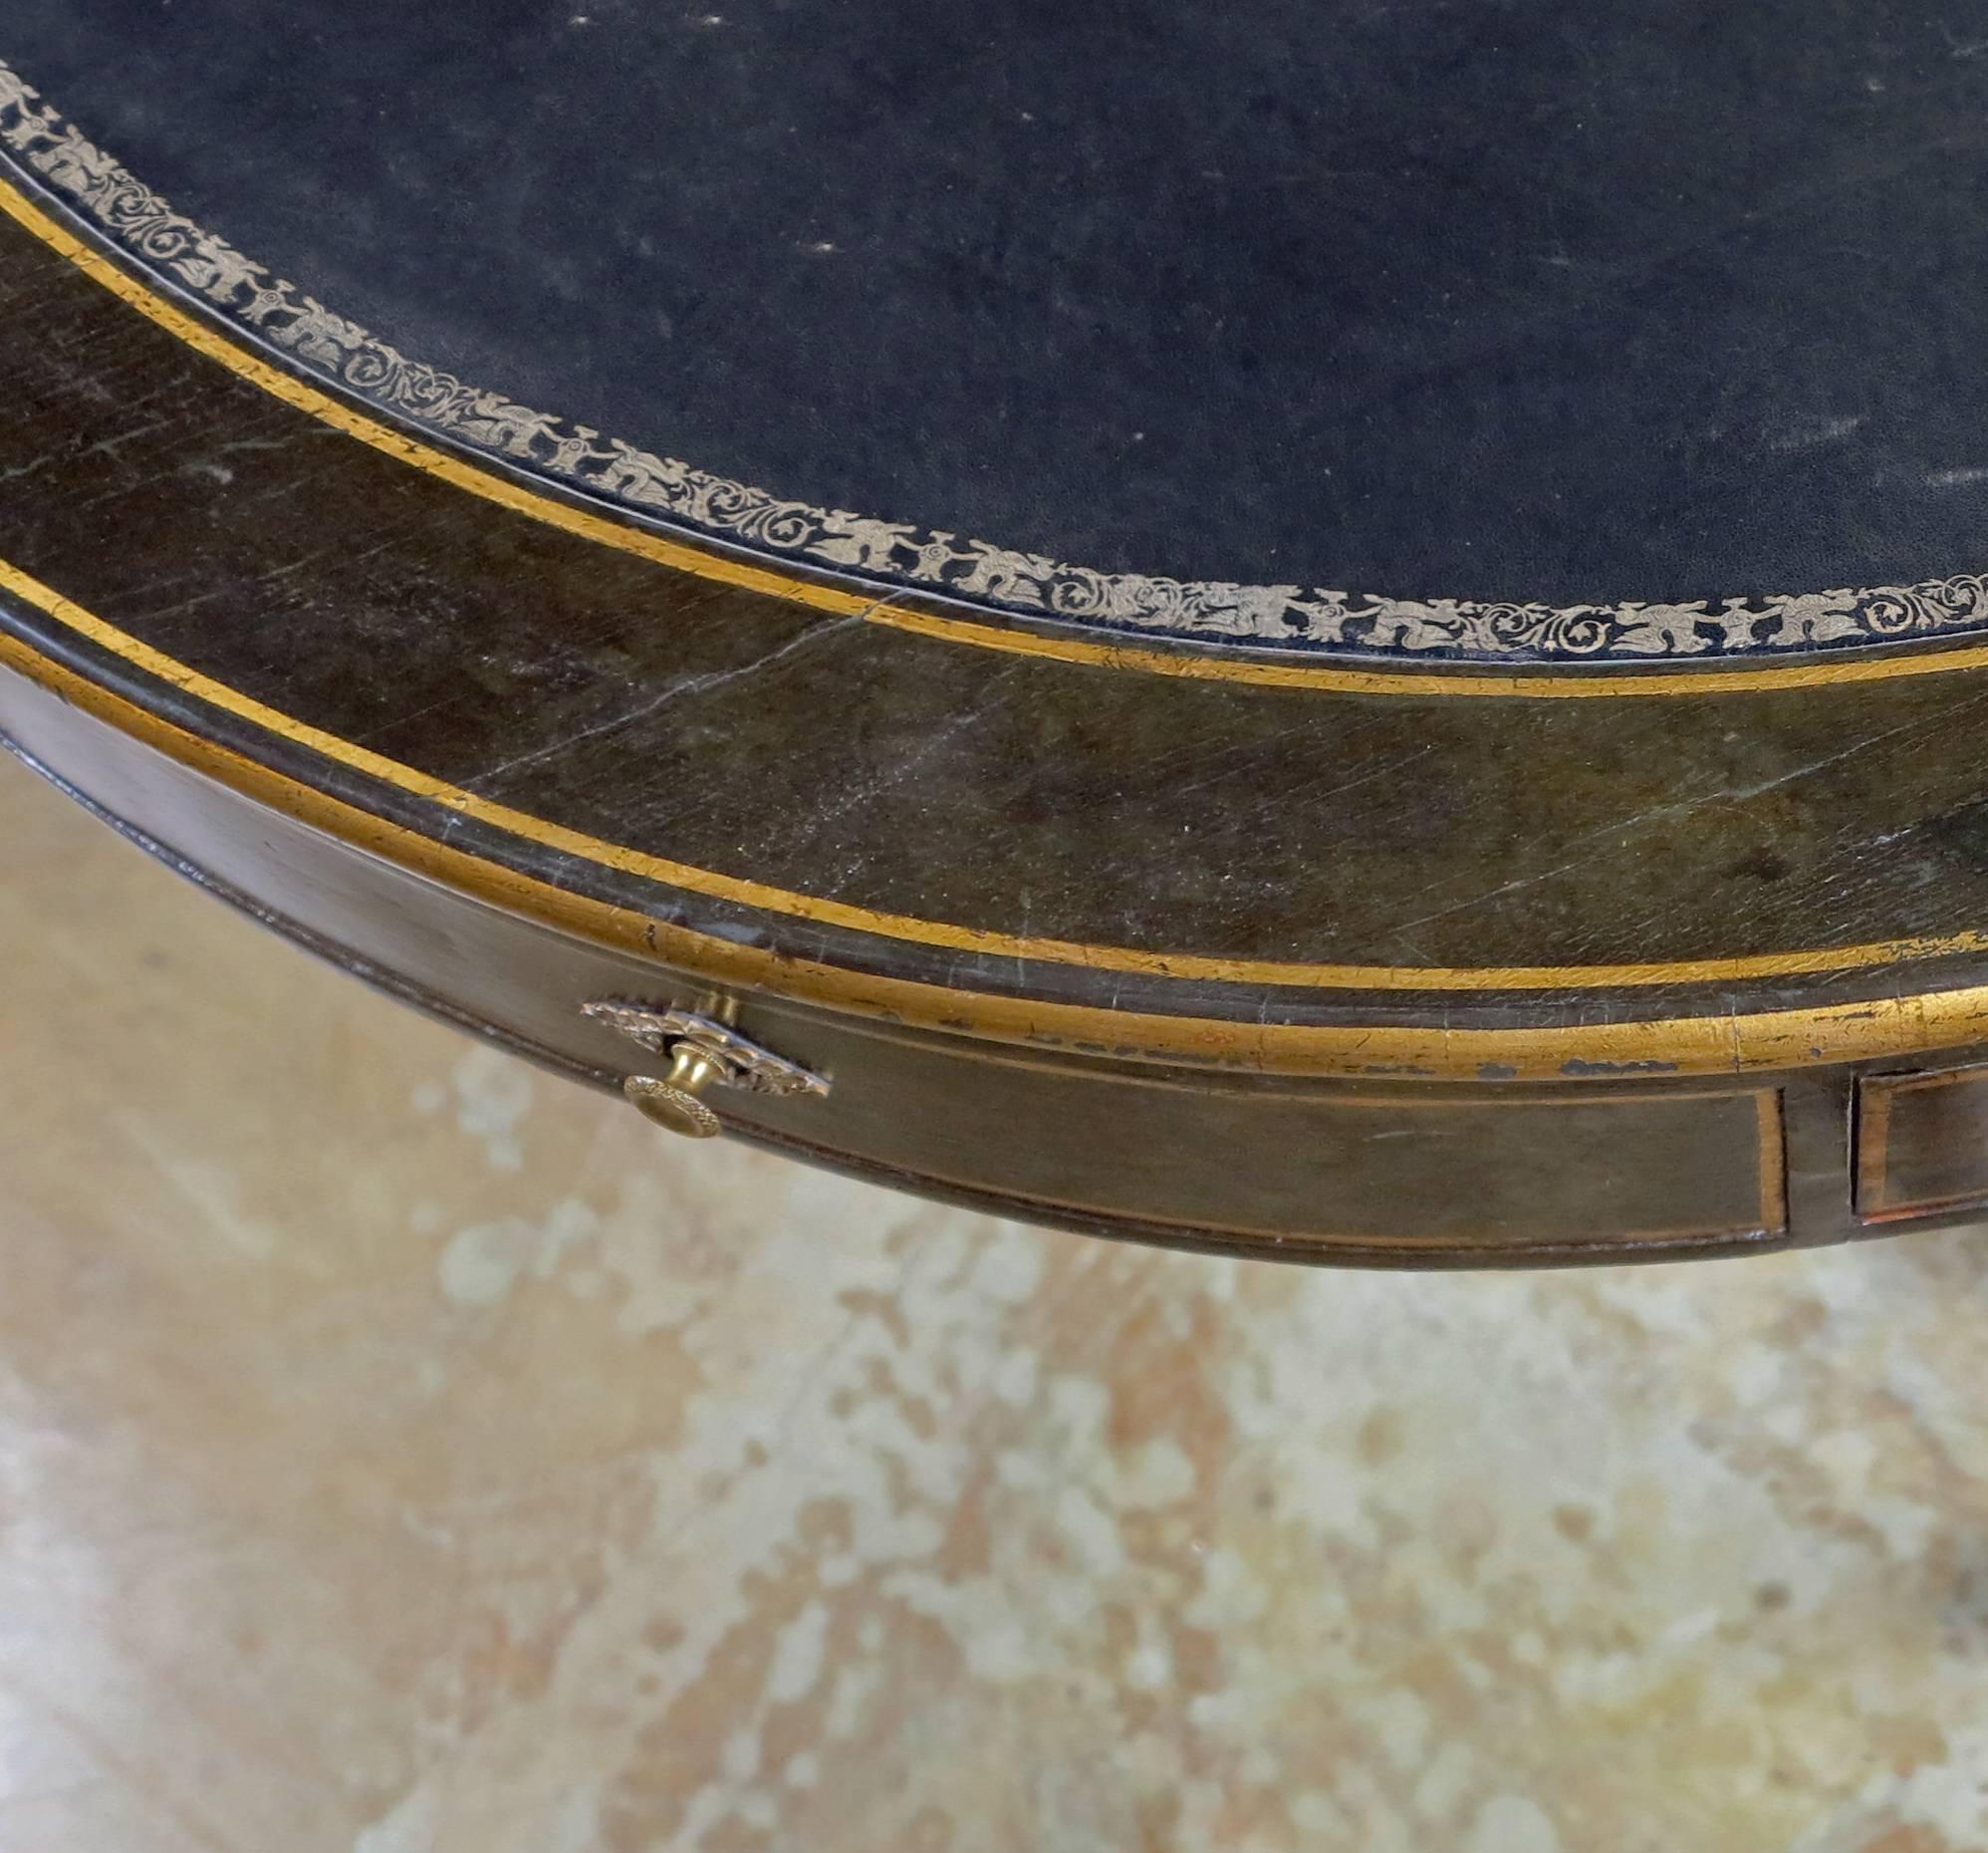 A Rare & Unusual Regency 
Baltic Circular Rent Table
Early 19th Century

The ebonized and parcel gilt table with a circular top with a tooled leather top over four drawers and four false drawers all resting on a tripod base with a central column